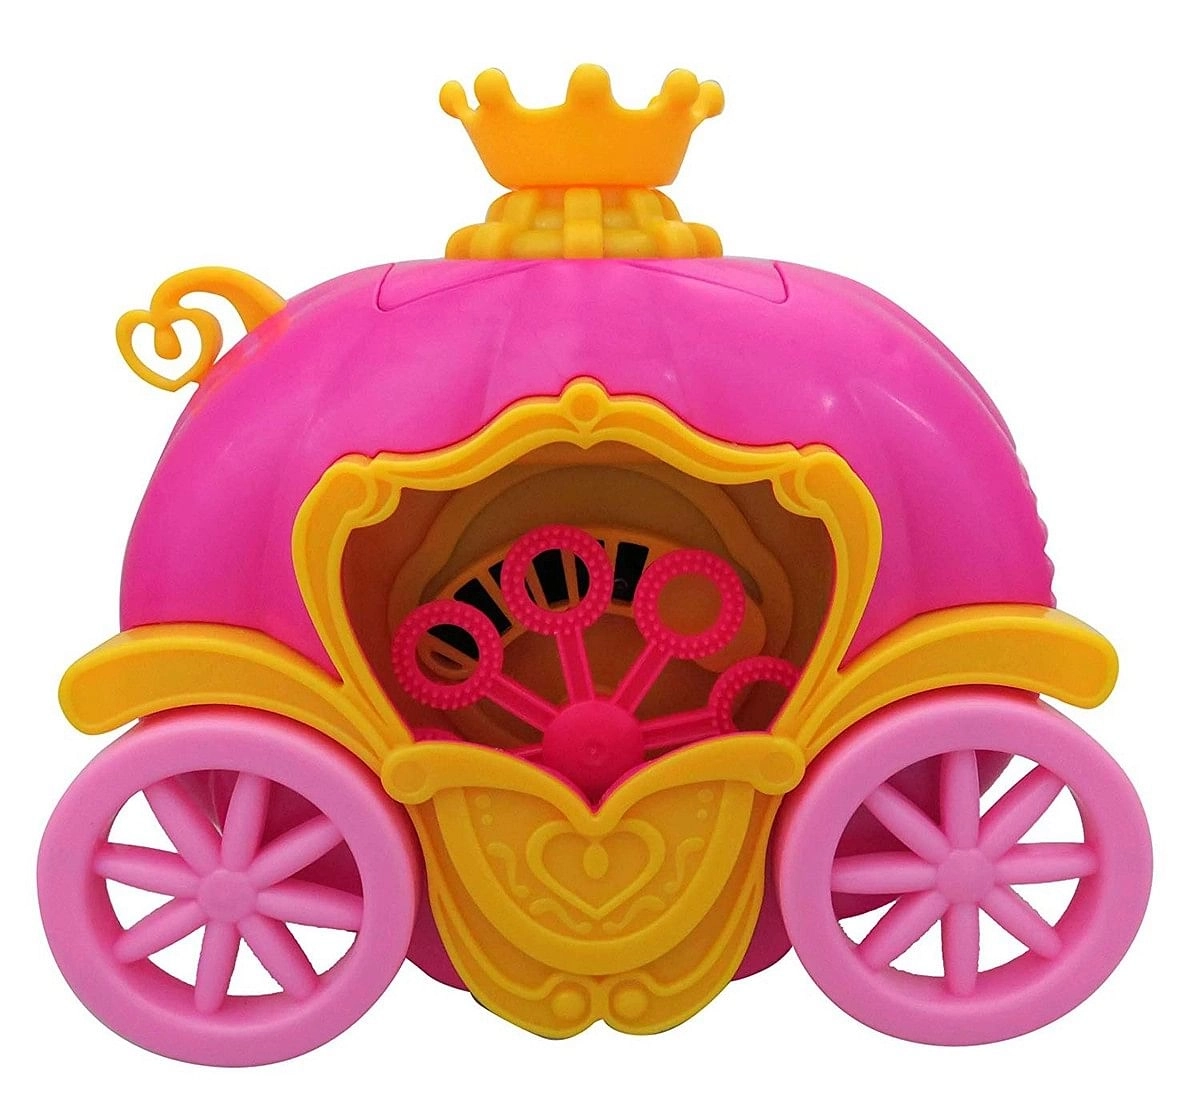 Rainbow Bubbles Carriage Bubble Blower- Impulse Toys for Kids age 3Y+ (Pink)